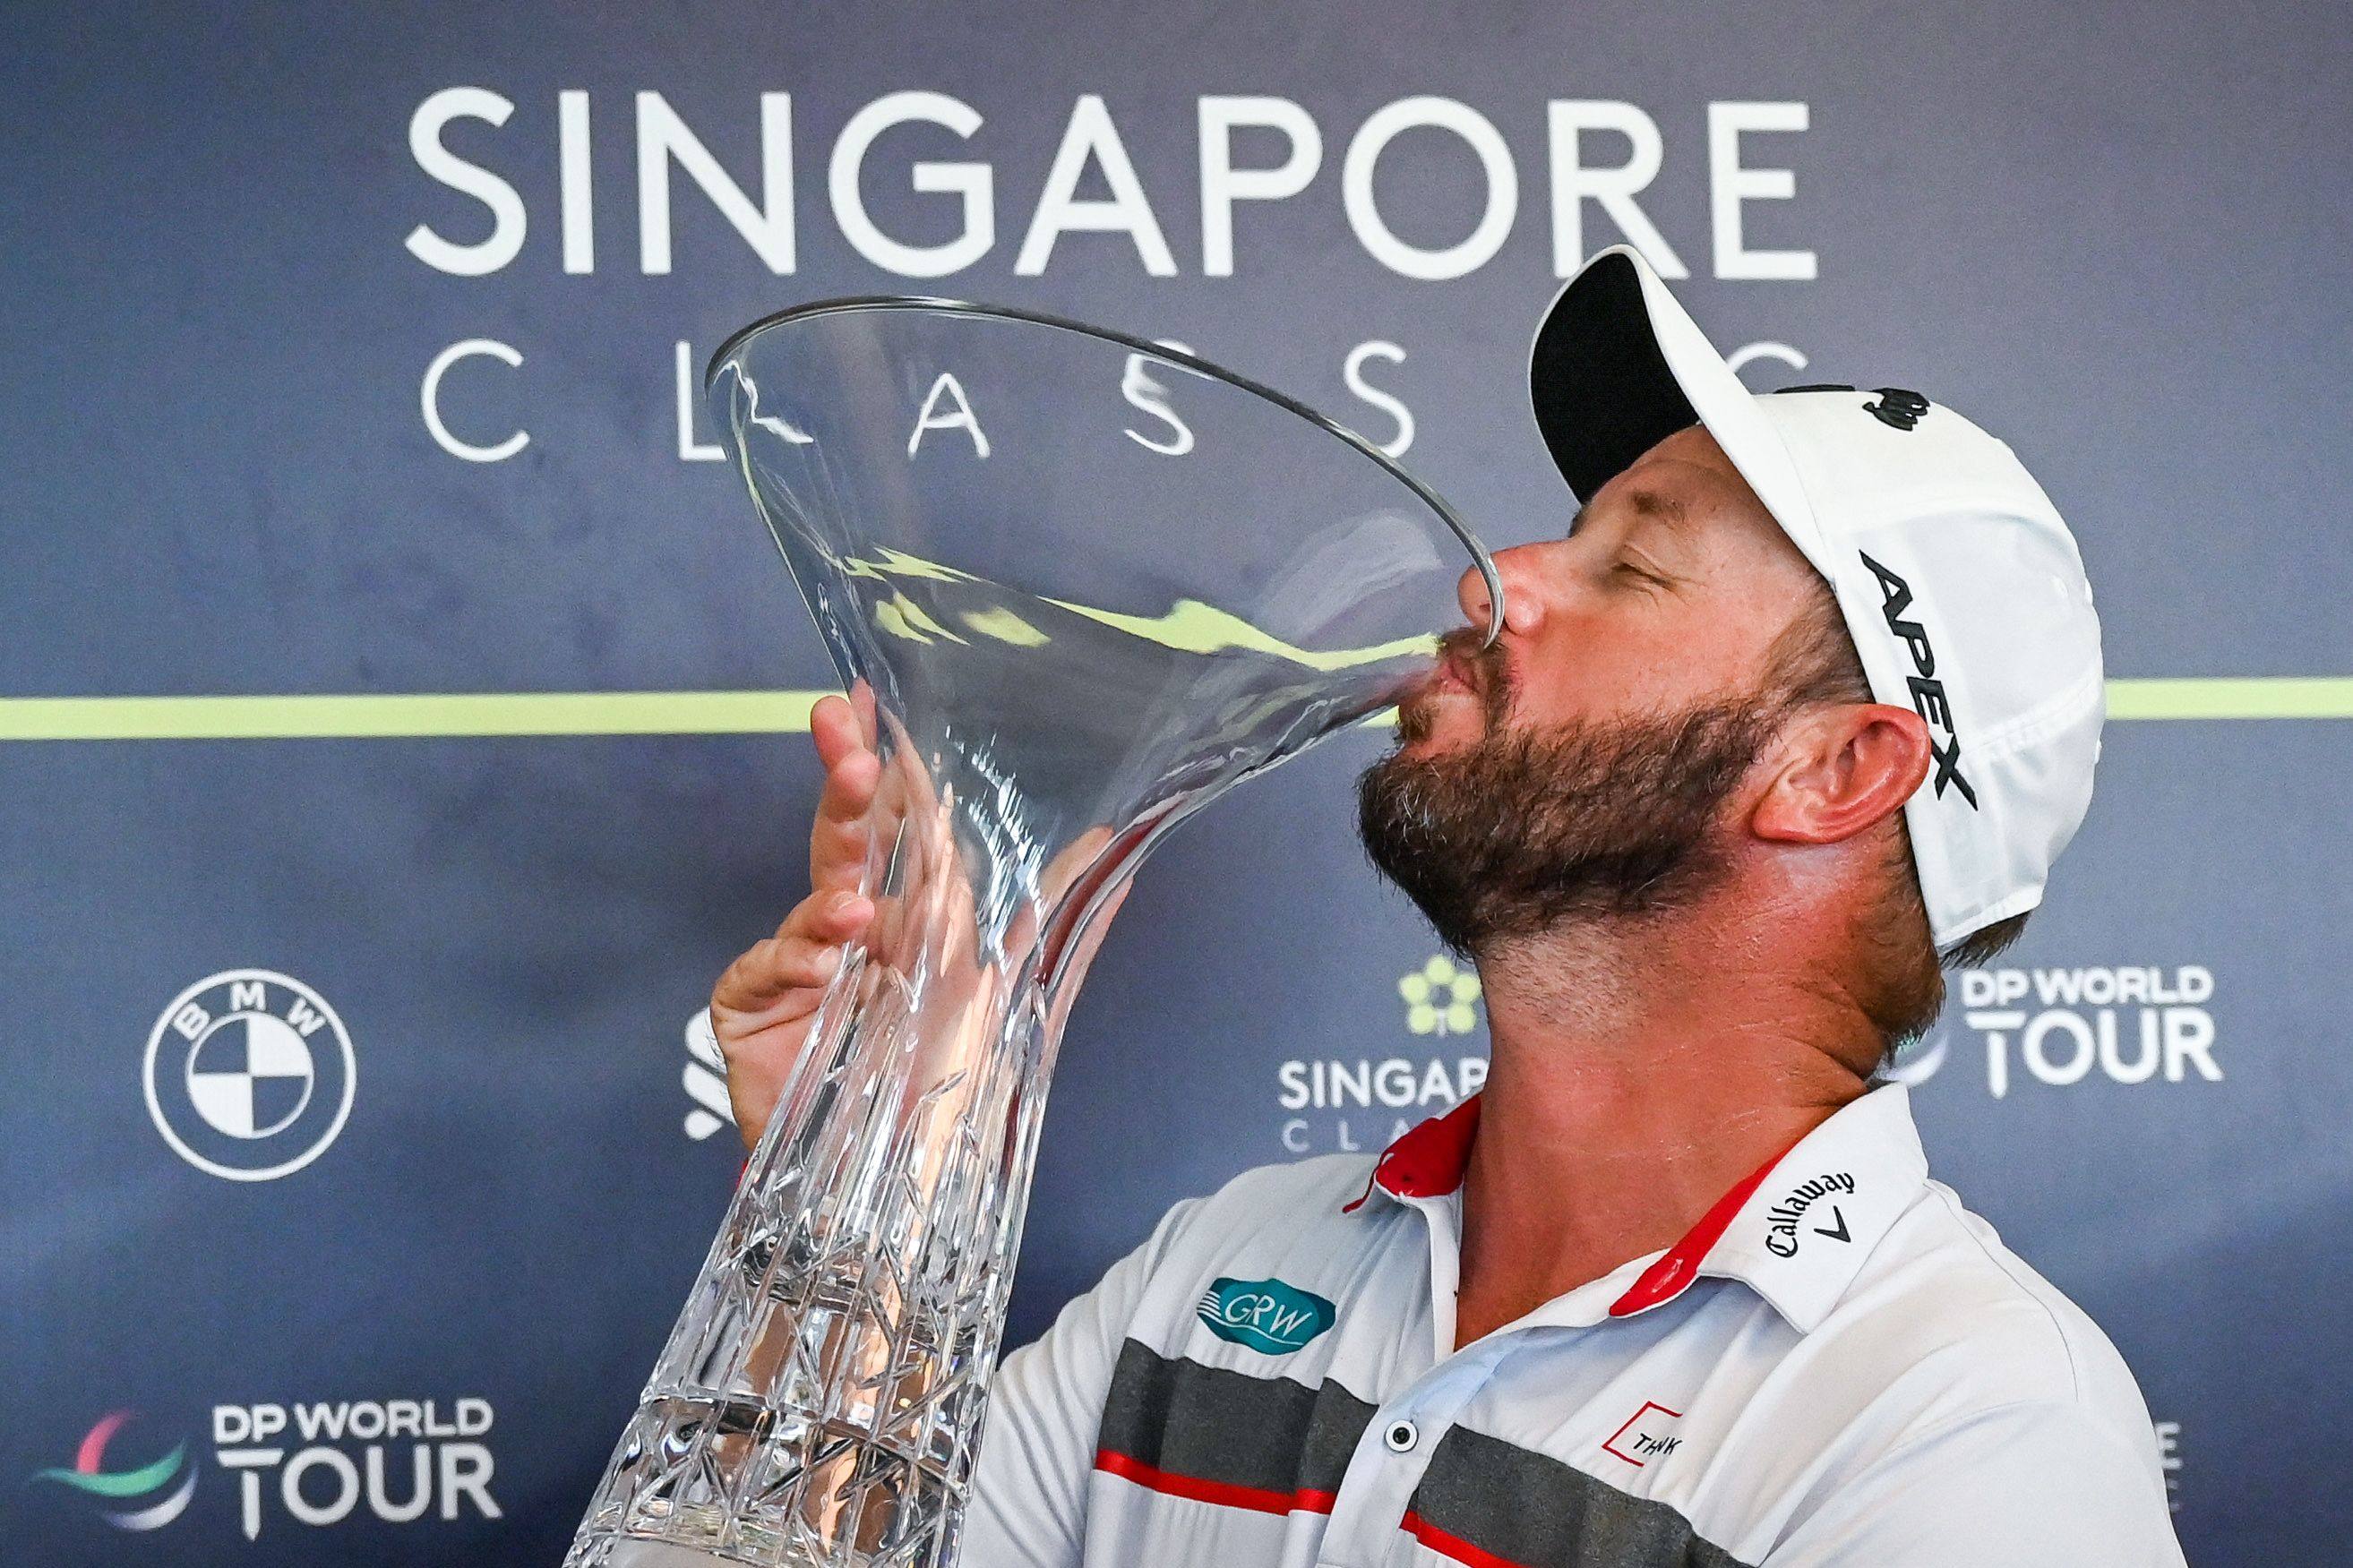 Ockie Strydom poses with the trophy after winning the DP World Tour Singapore Classic. Photo: AFP